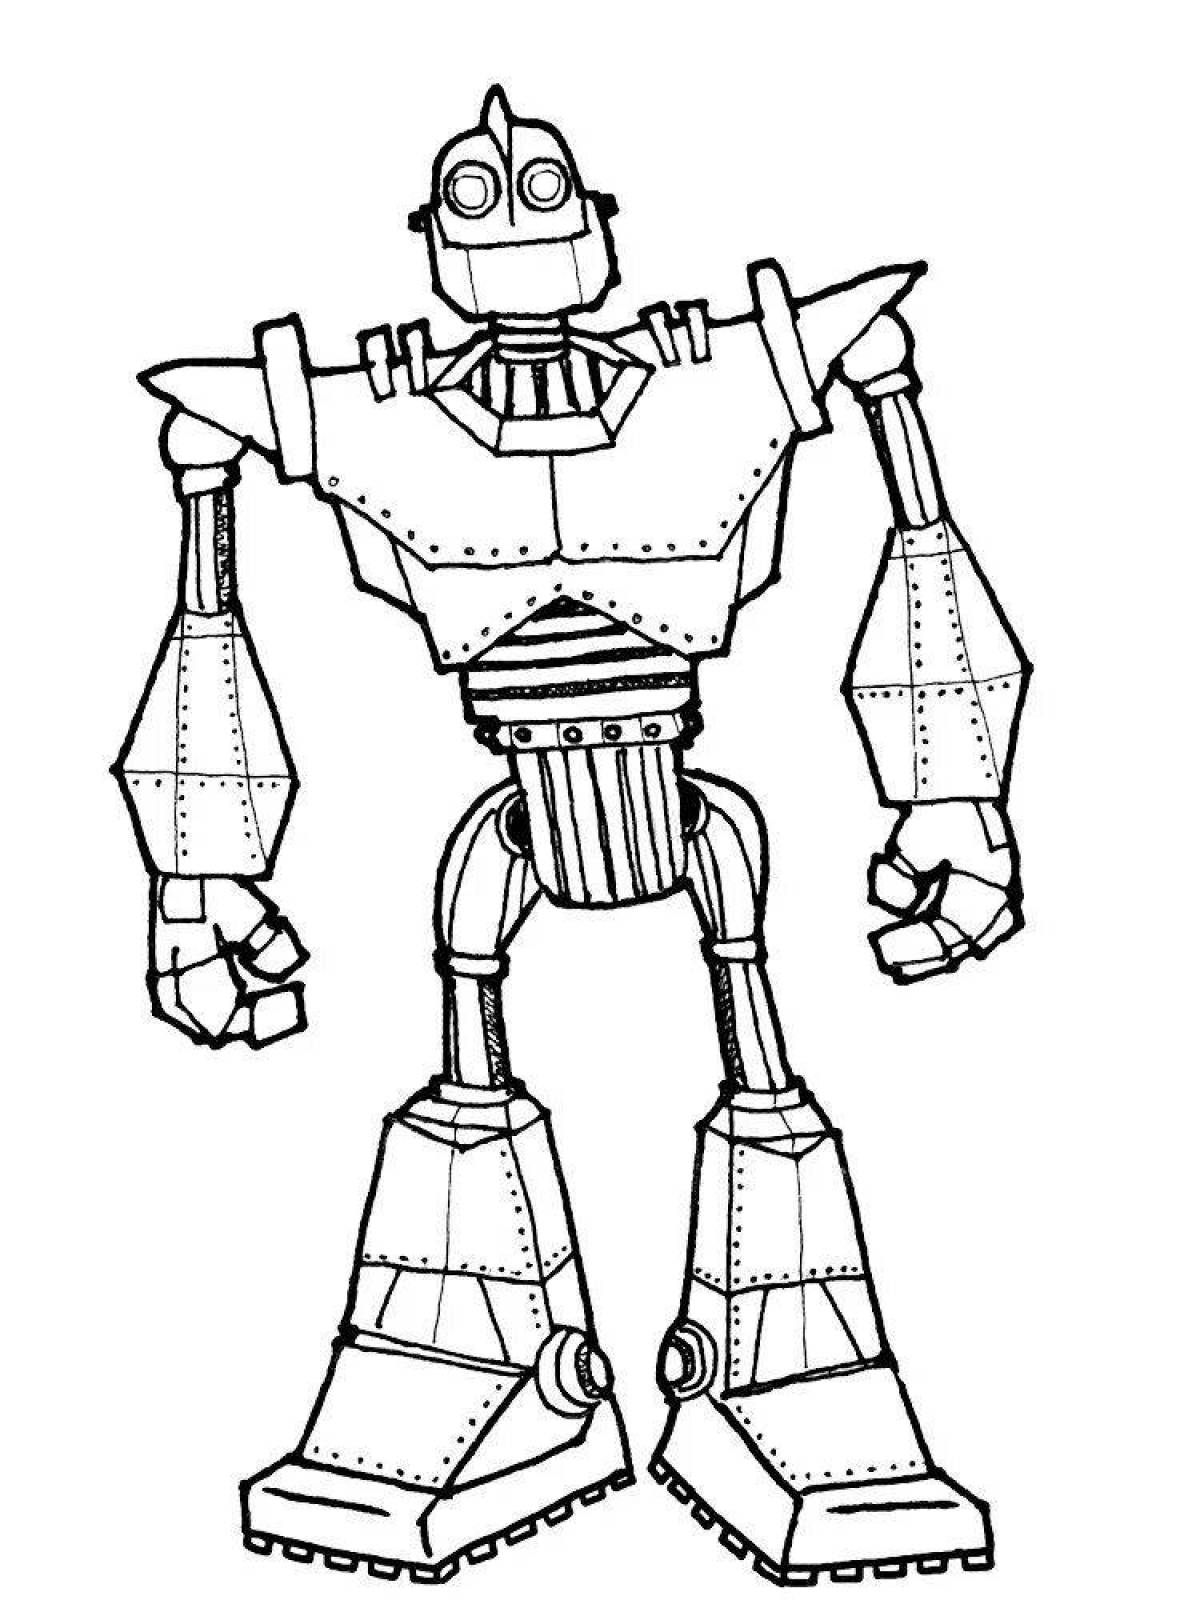 Innovative robot coloring book for kids